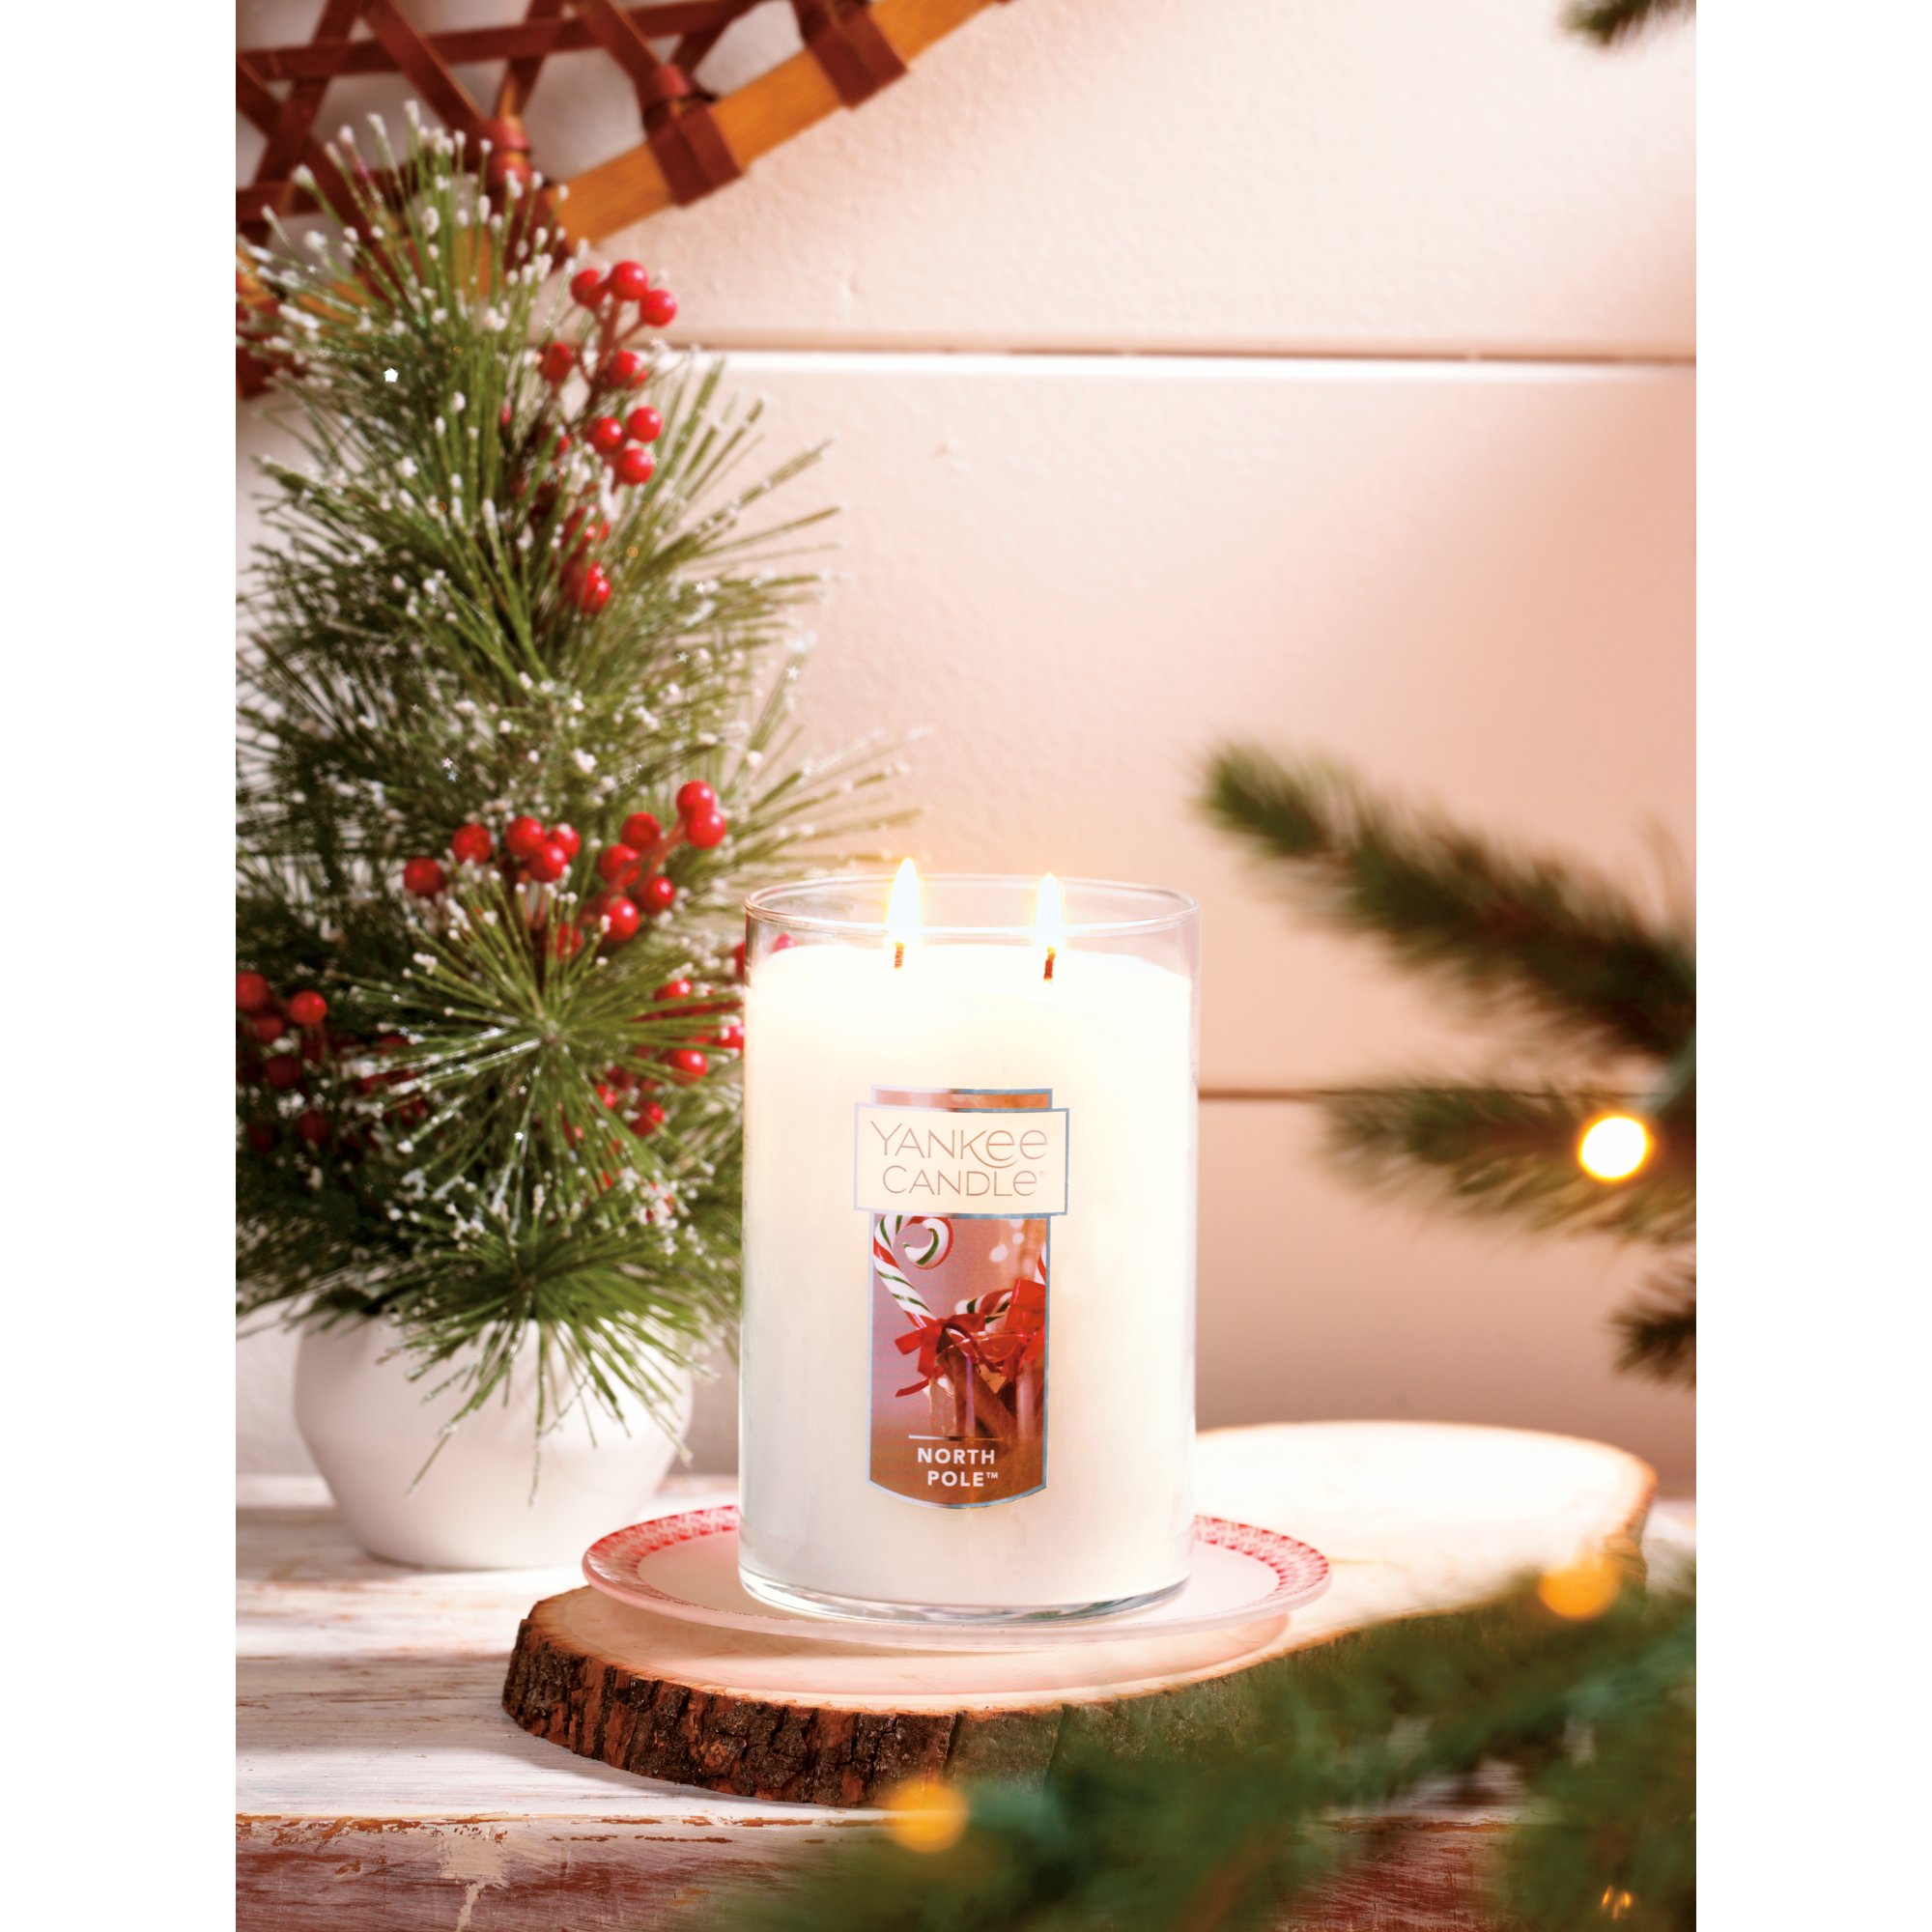 NEW ARRIVALS It's a Yankee Candle Christmas - warm, wonderful and filled  with inviting scents. Our three new arri…